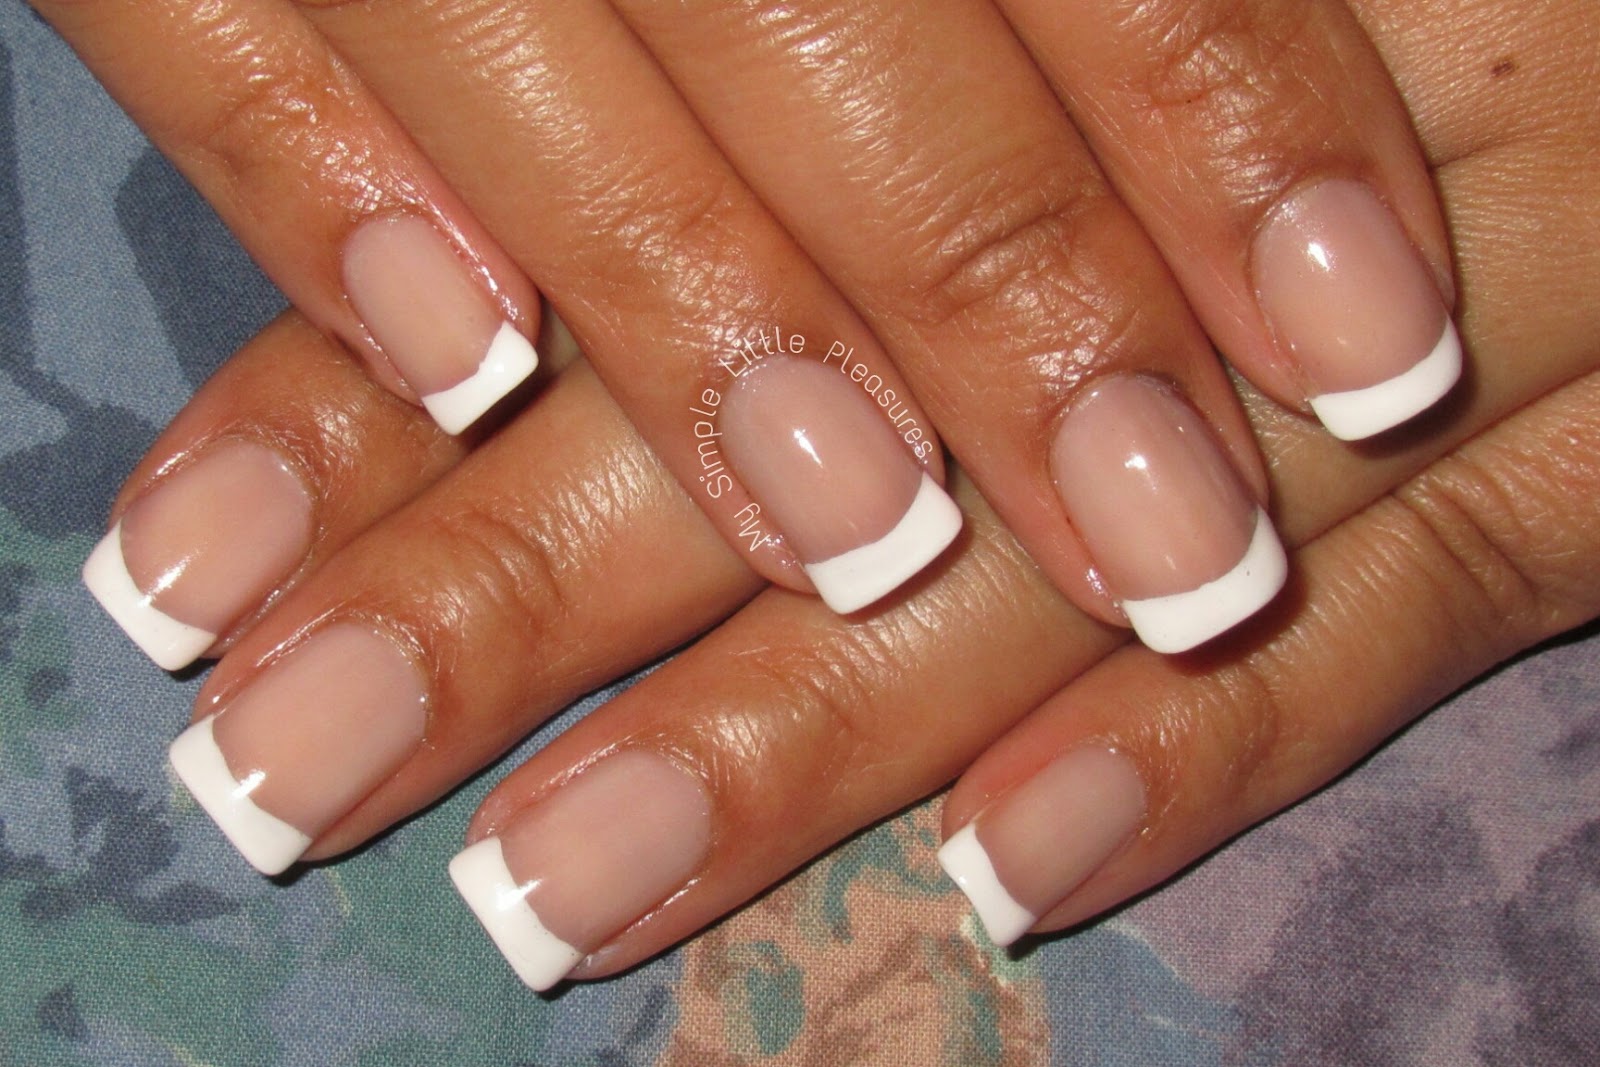 3. Classic Black and White French Manicure Tutorial - wide 5